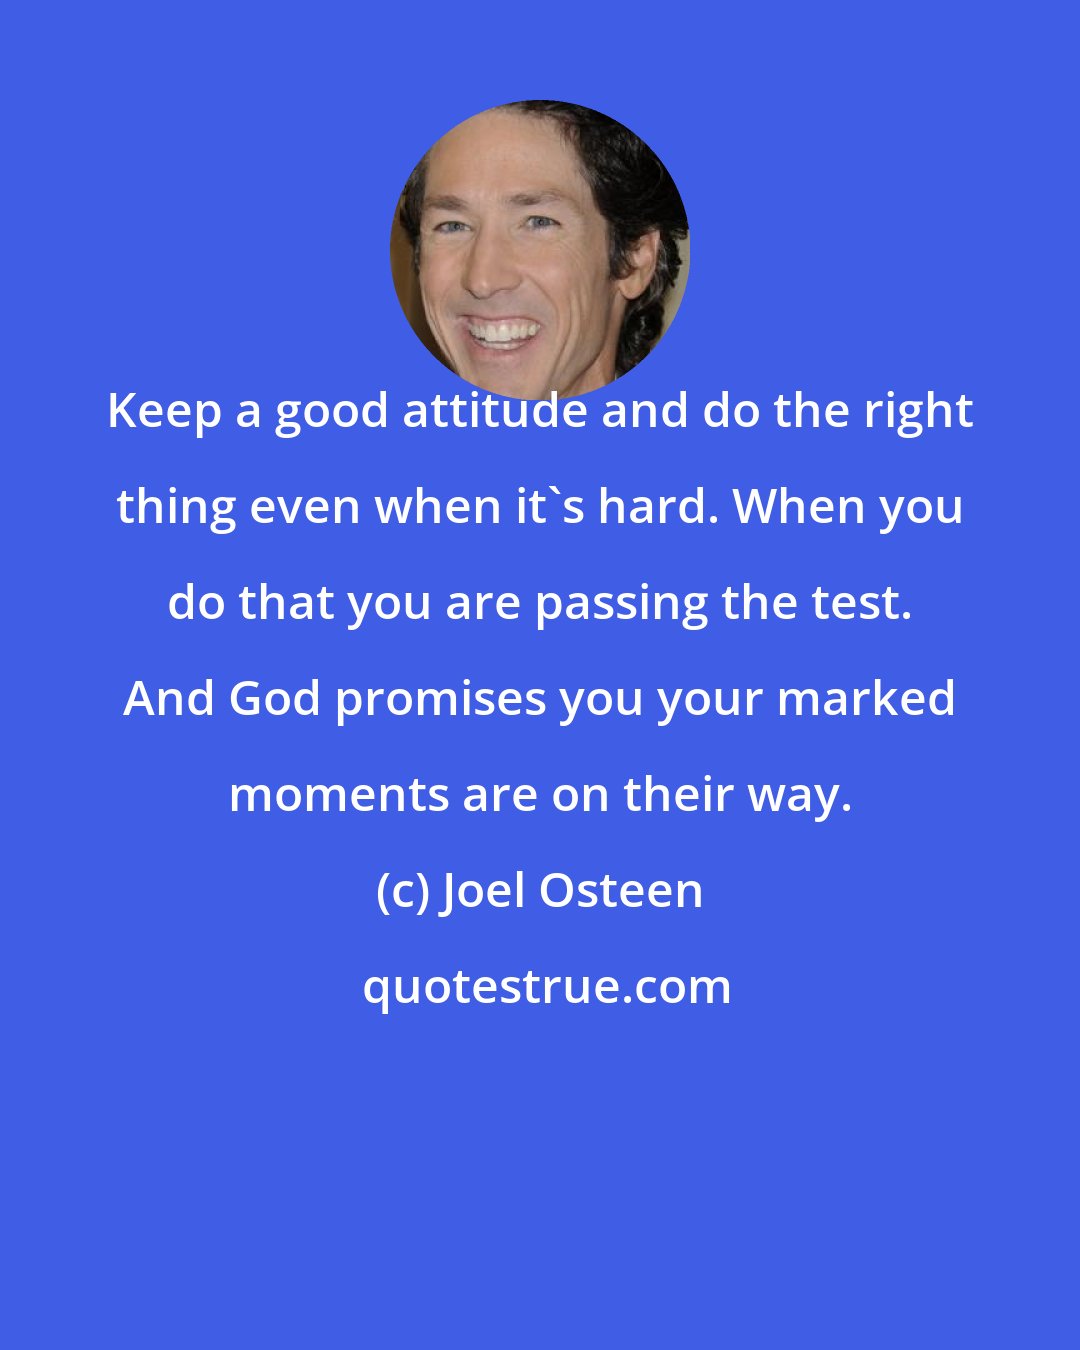 Joel Osteen: Keep a good attitude and do the right thing even when it's hard. When you do that you are passing the test. And God promises you your marked moments are on their way.